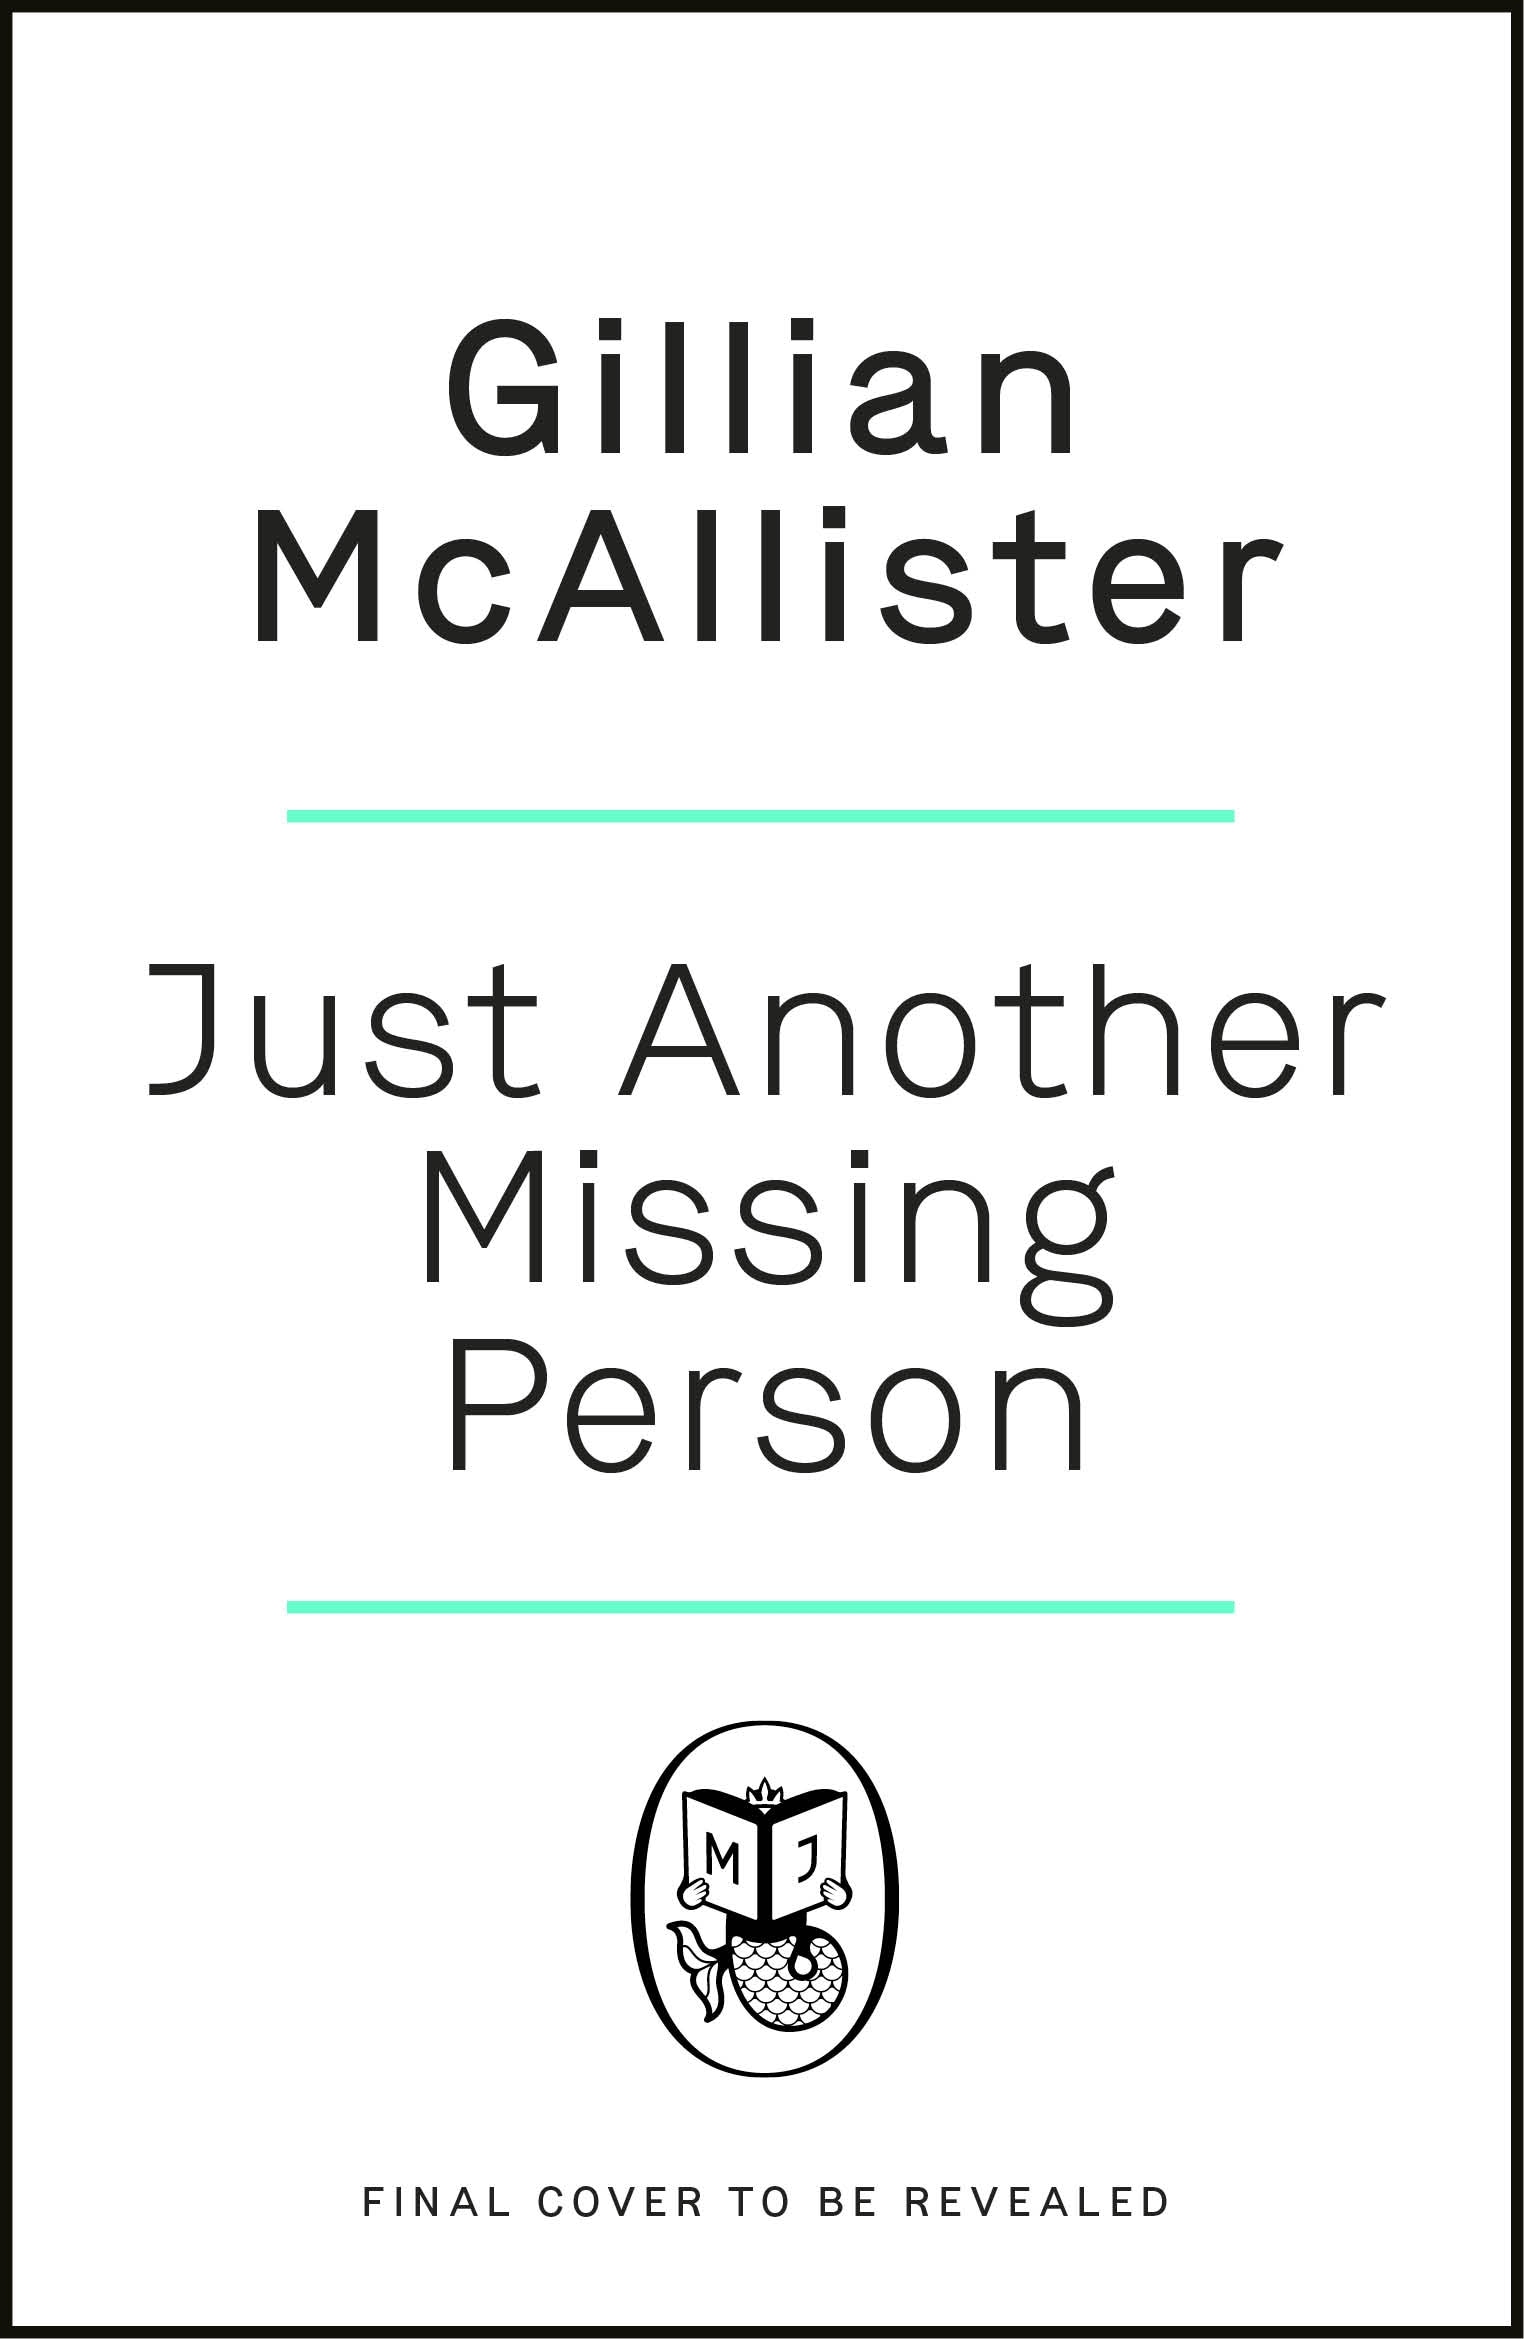 Book “Just Another Missing Person” by Gillian McAllister — May 11, 2023